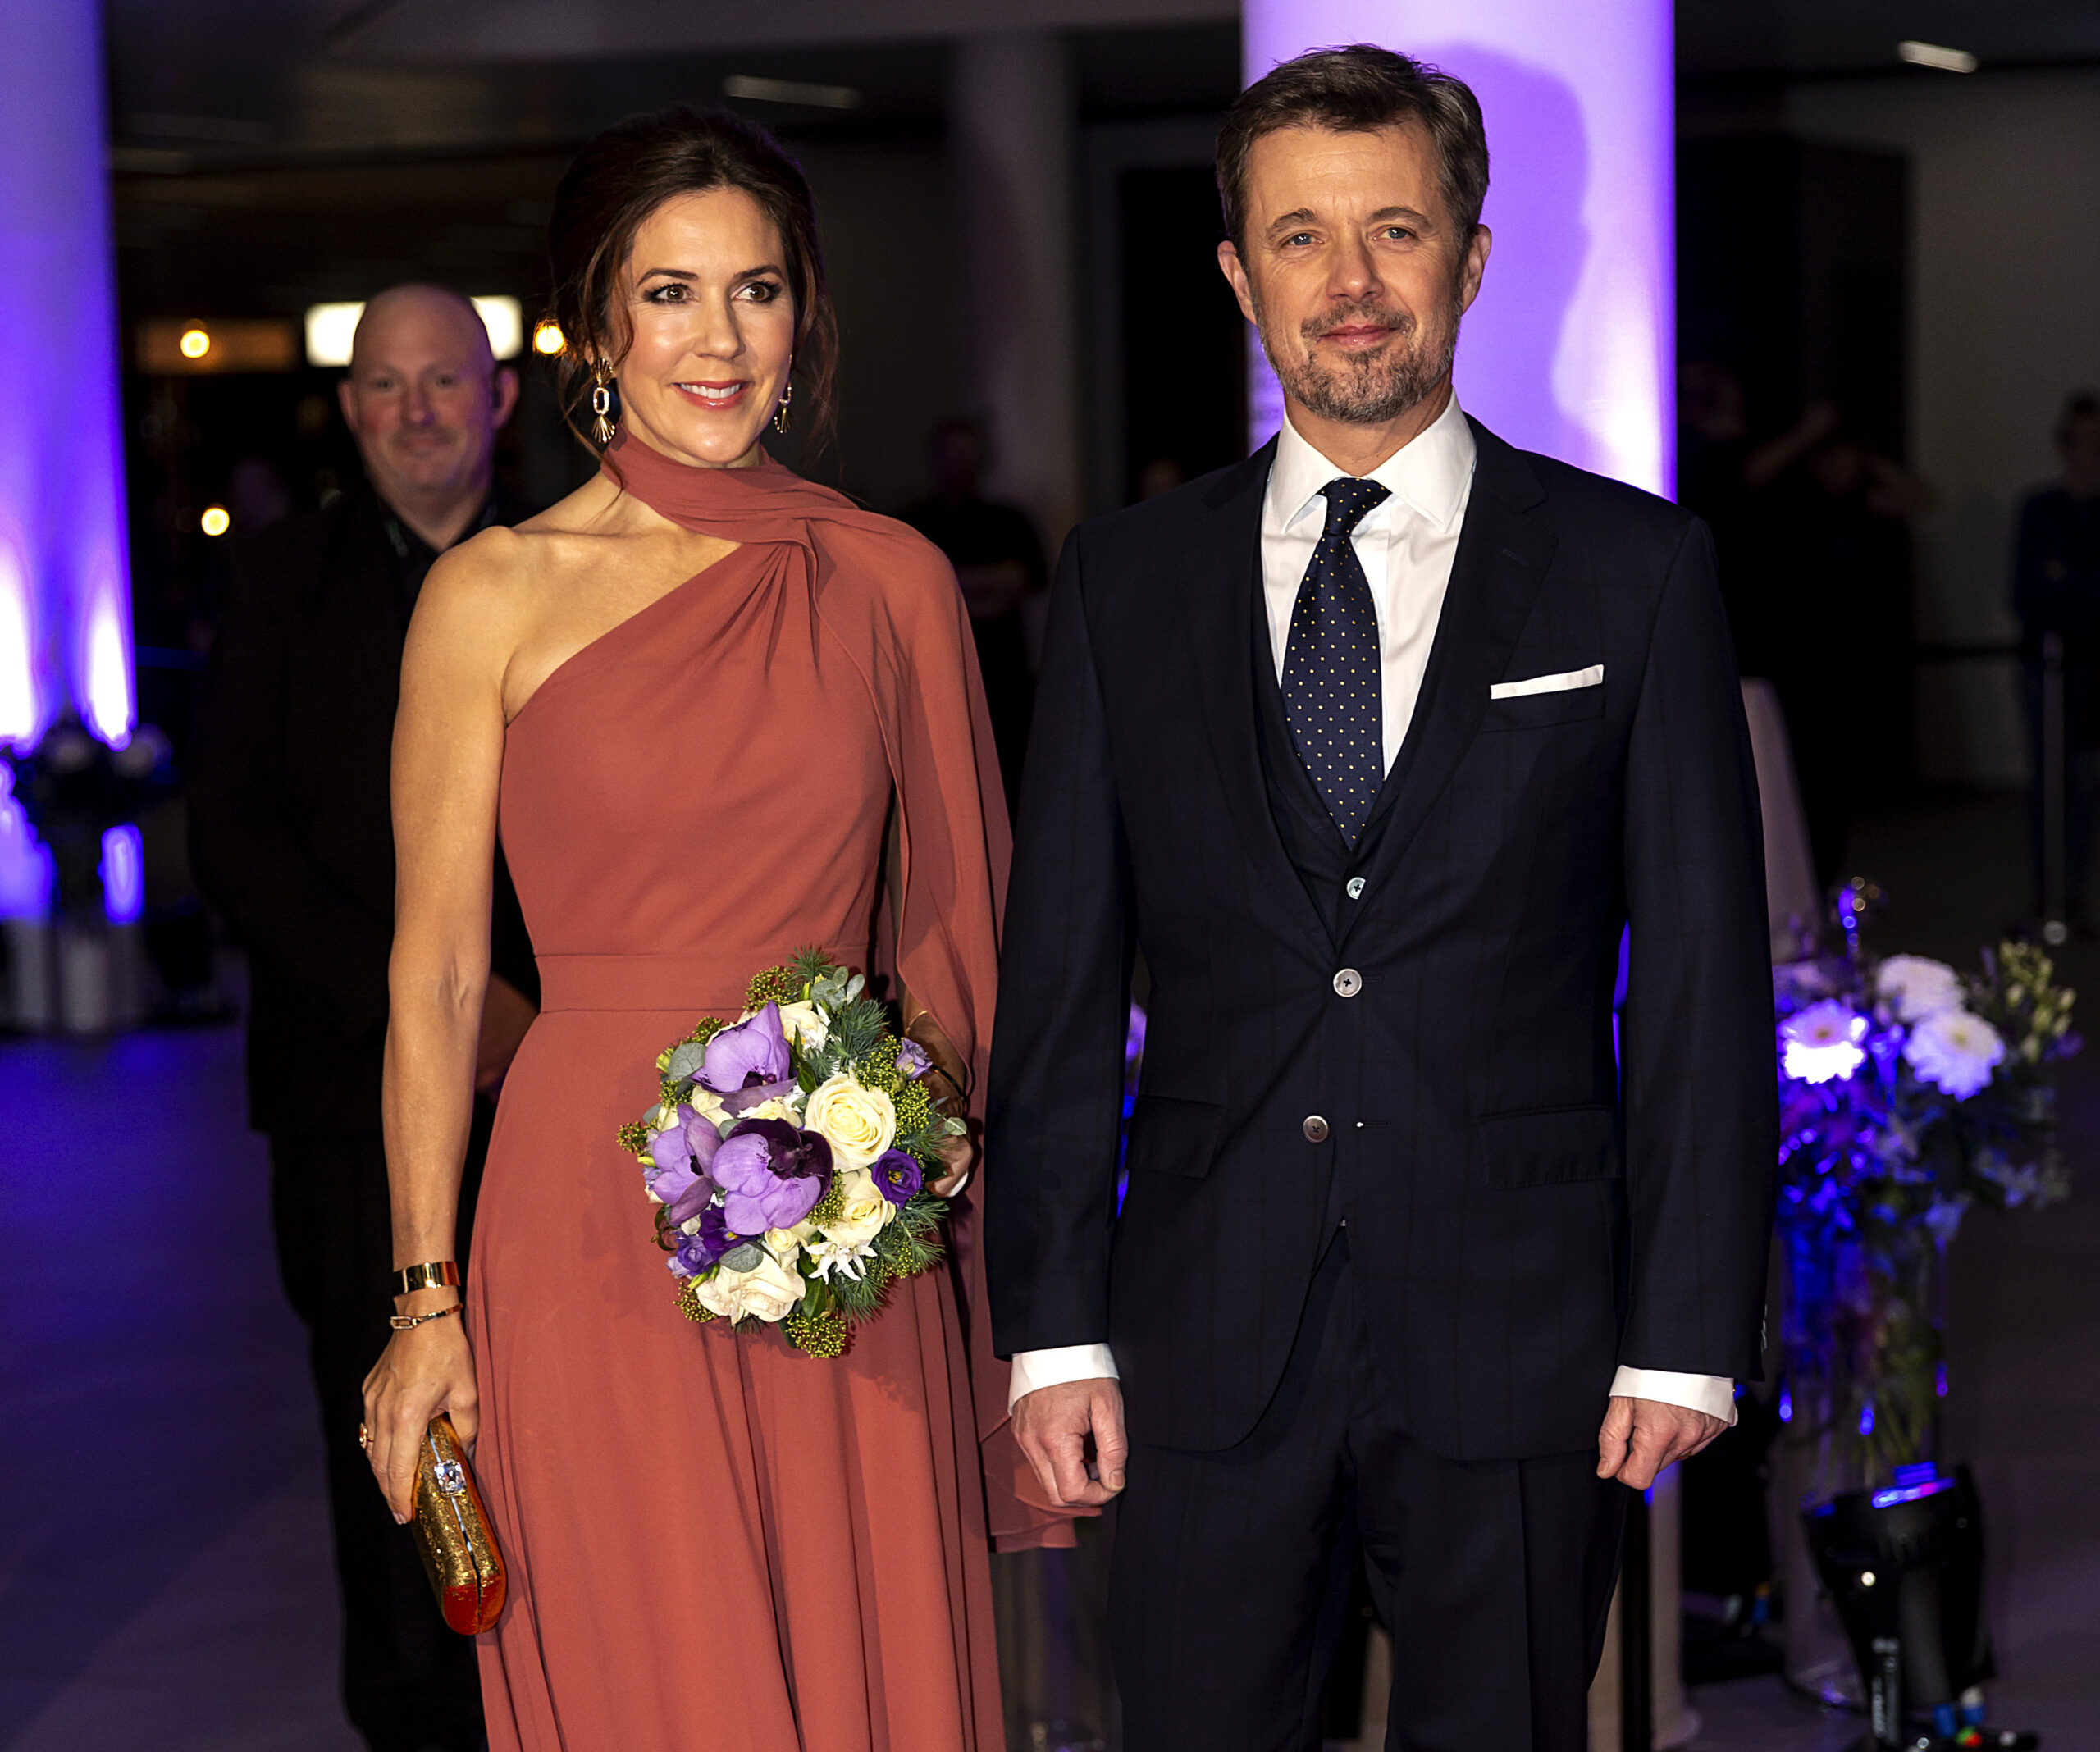 Prince Frederik looks absolutely smitten with Princess Mary as she glows in stunning evening gown